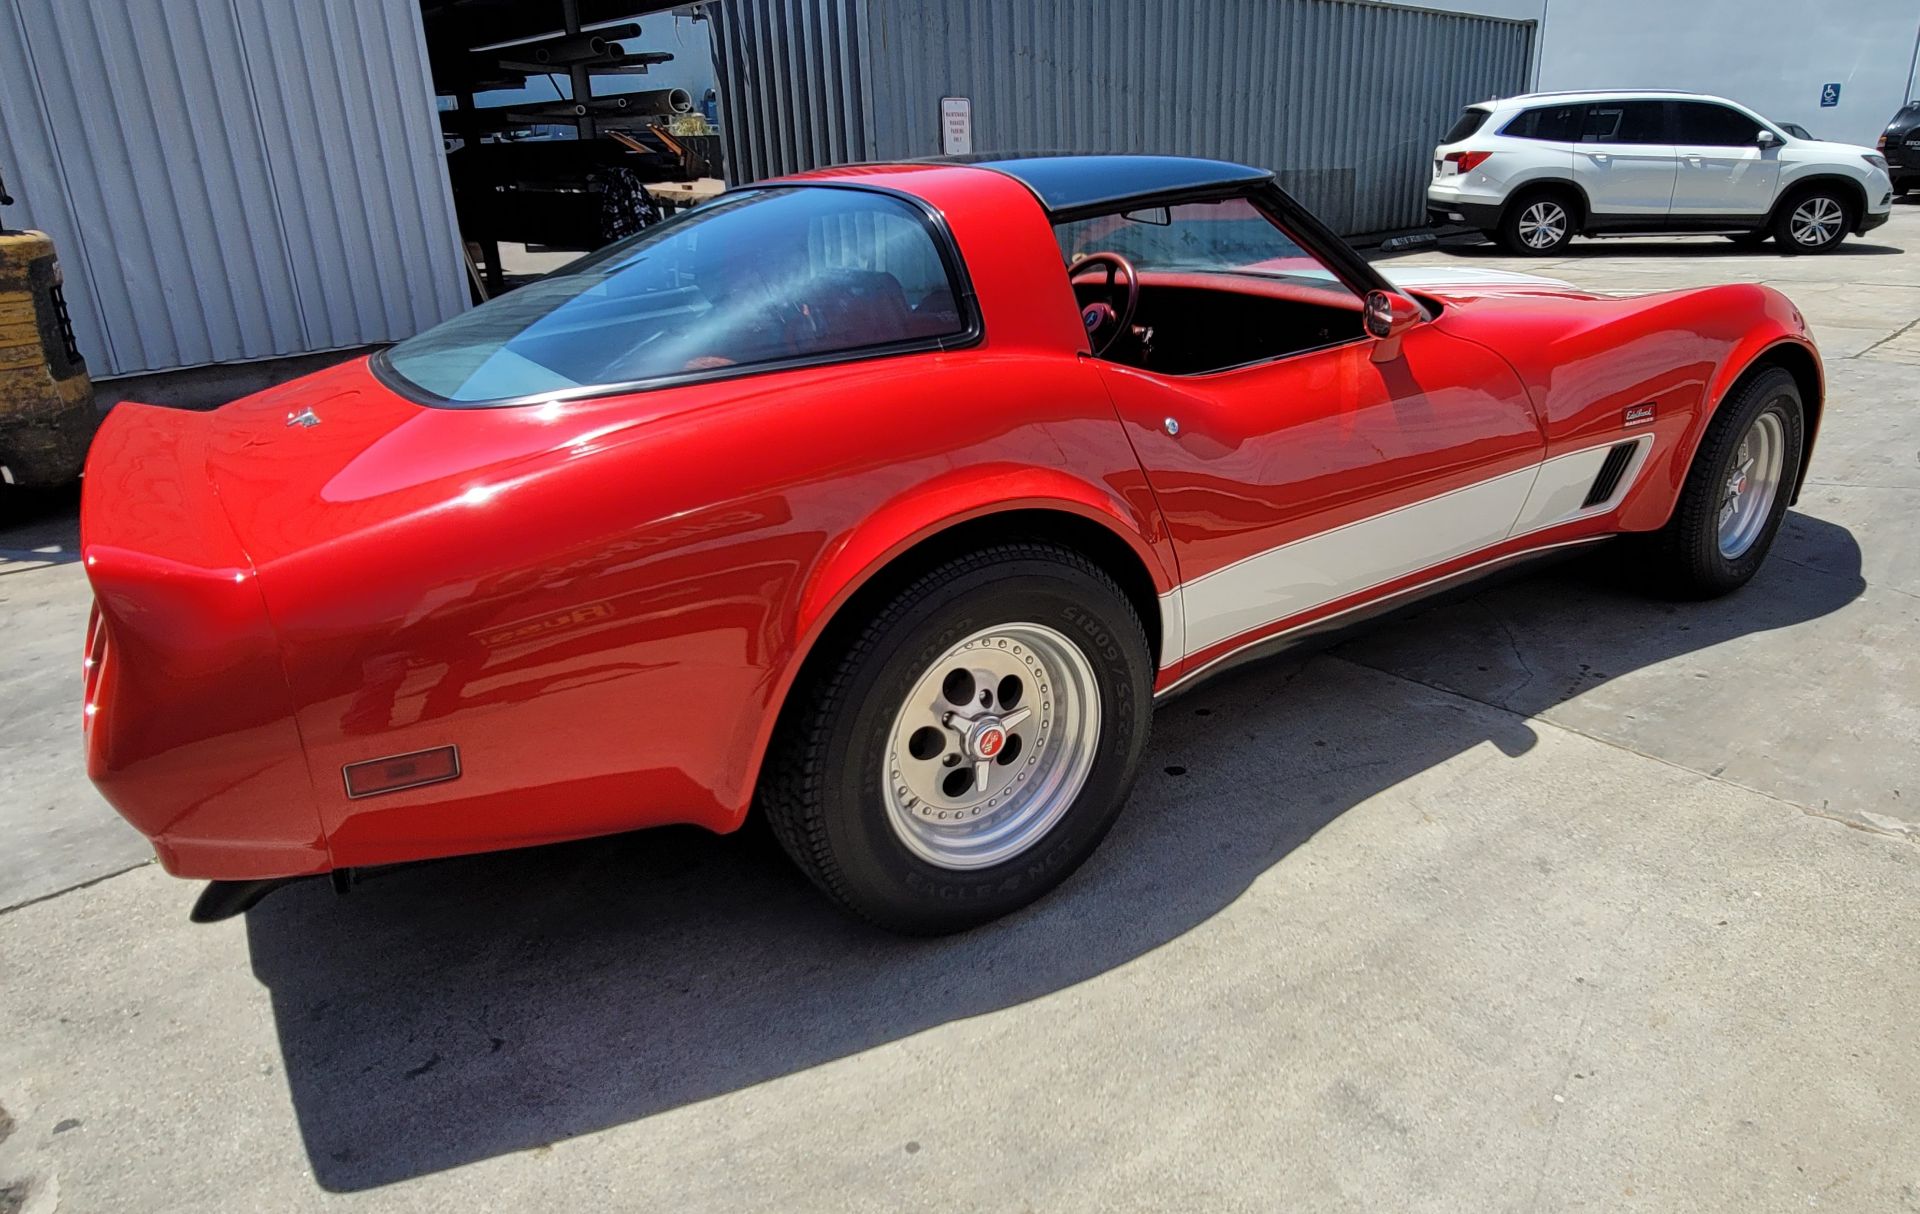 1980 CHEVROLET CORVETTE, WAS VIC EDELBROCK'S PERSONAL CAR BOUGHT FOR R&D, RED INTERIOR, TITLE ONLY. - Image 13 of 70